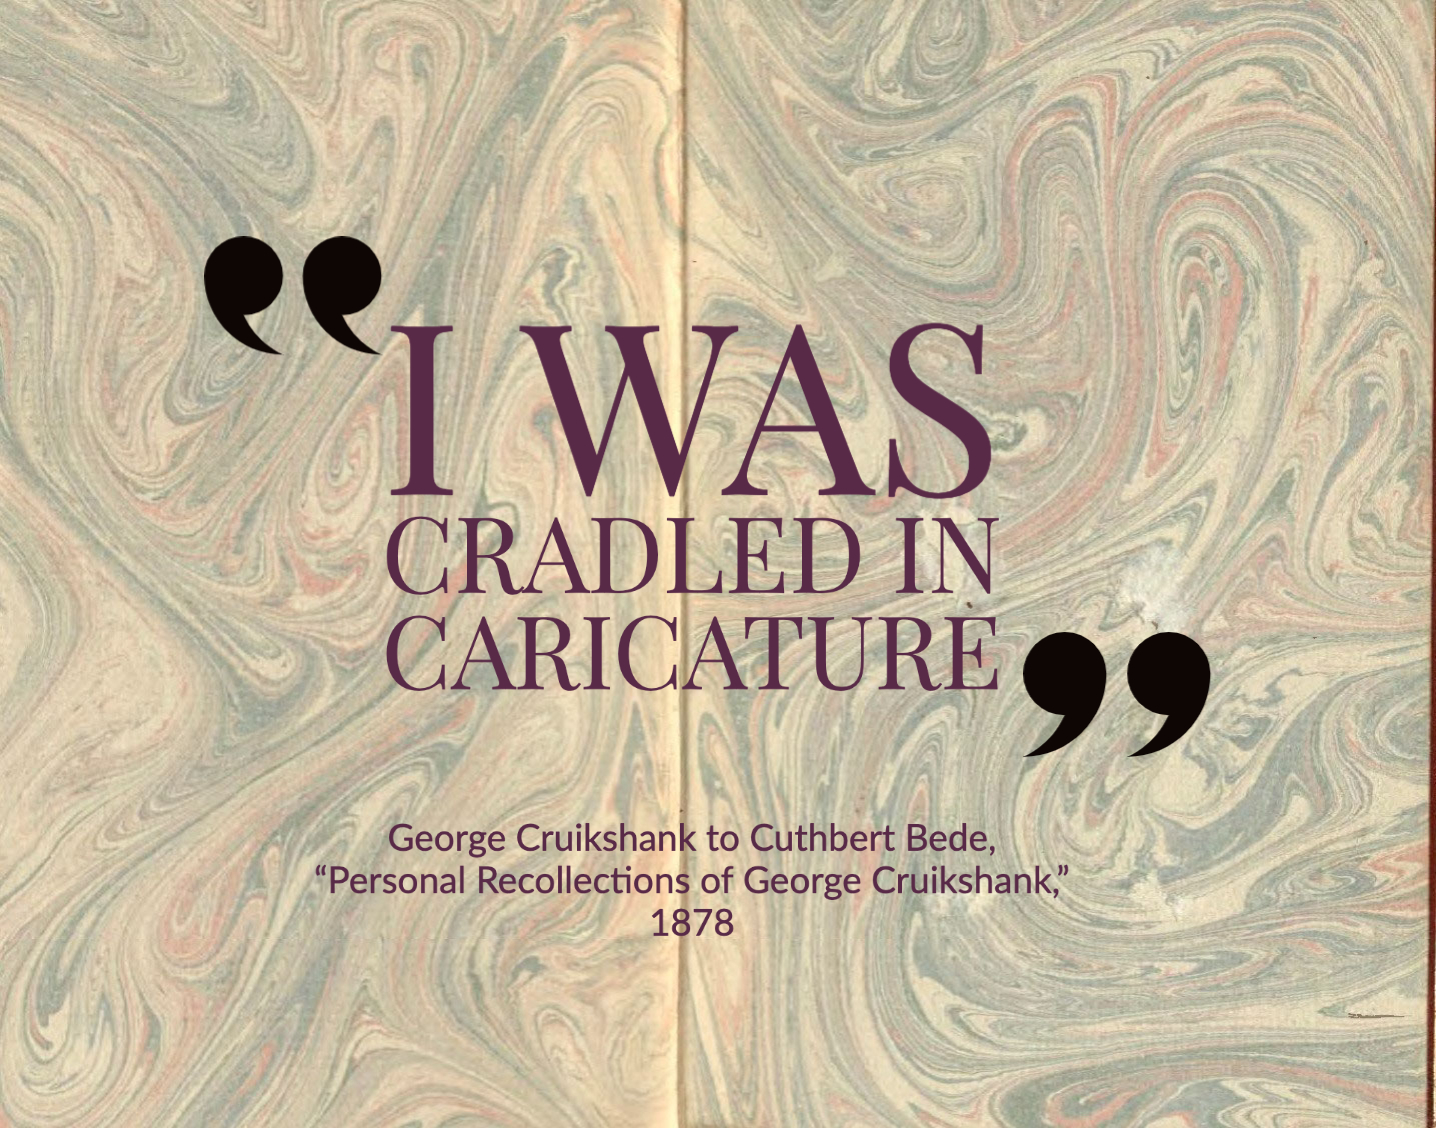 A quote on a marbled background reading, "I was cradled in caricature."